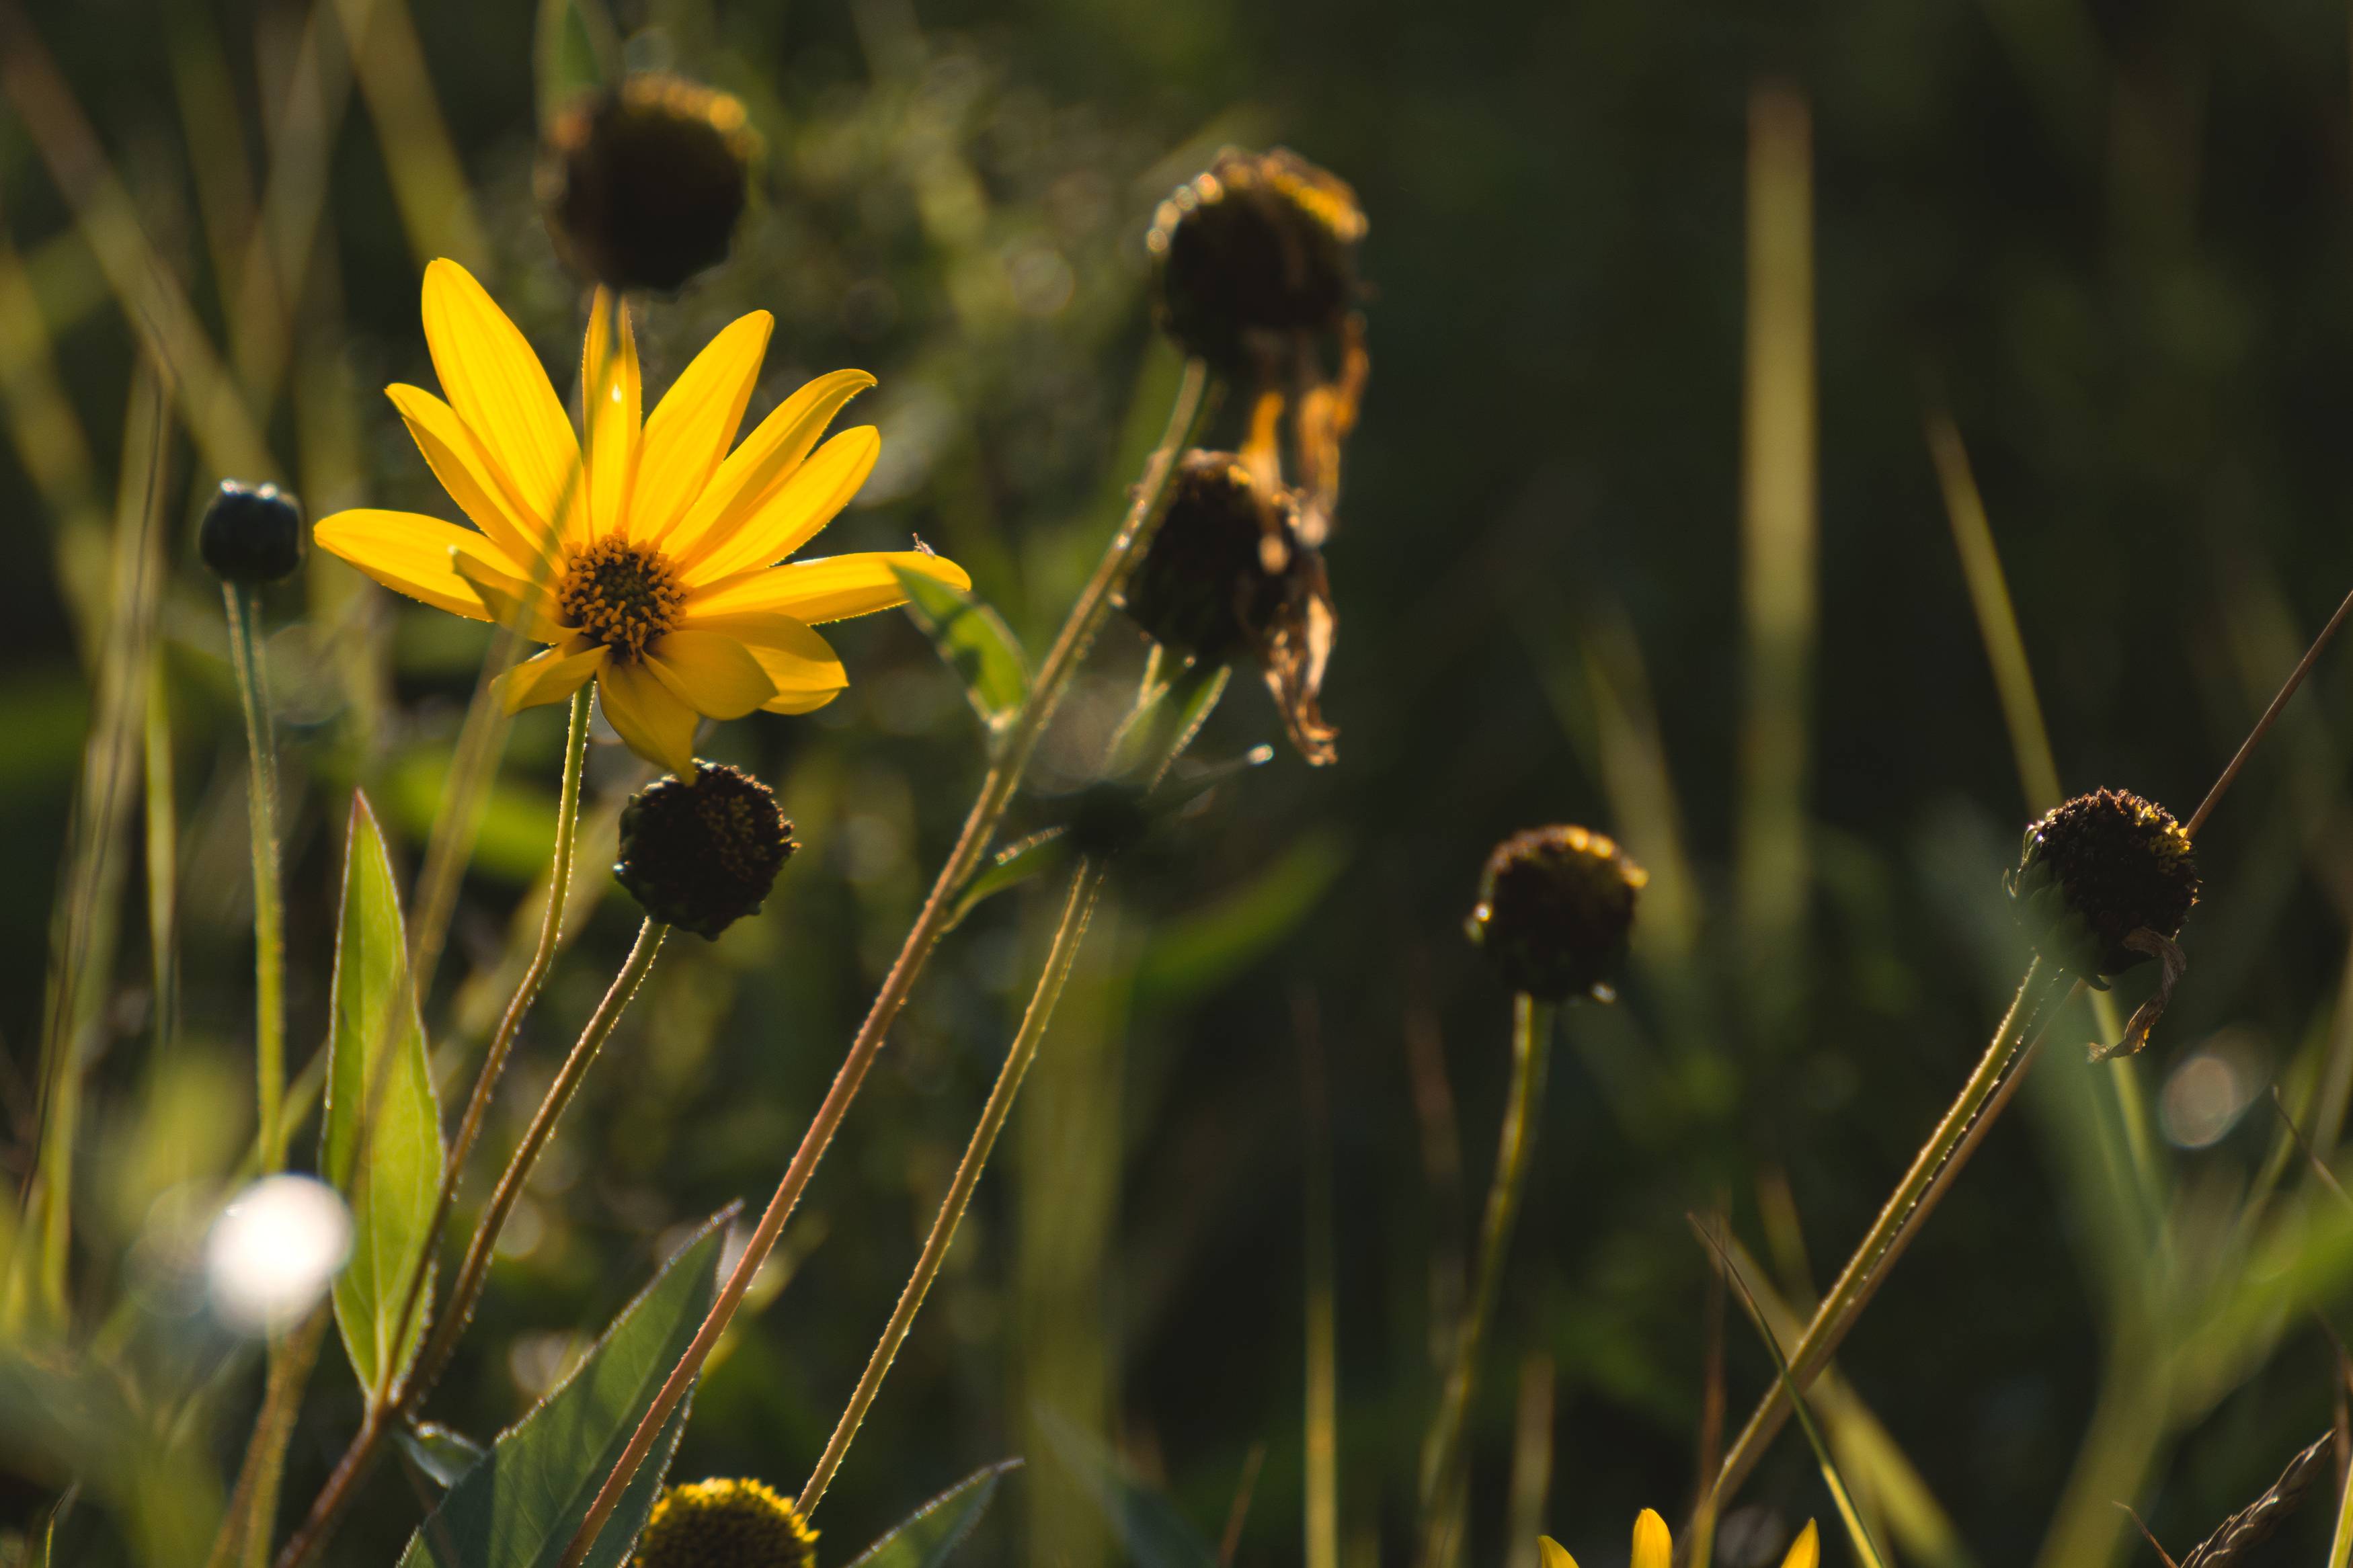 Yellow Flower on the Meadow. FREE image on LibreShot